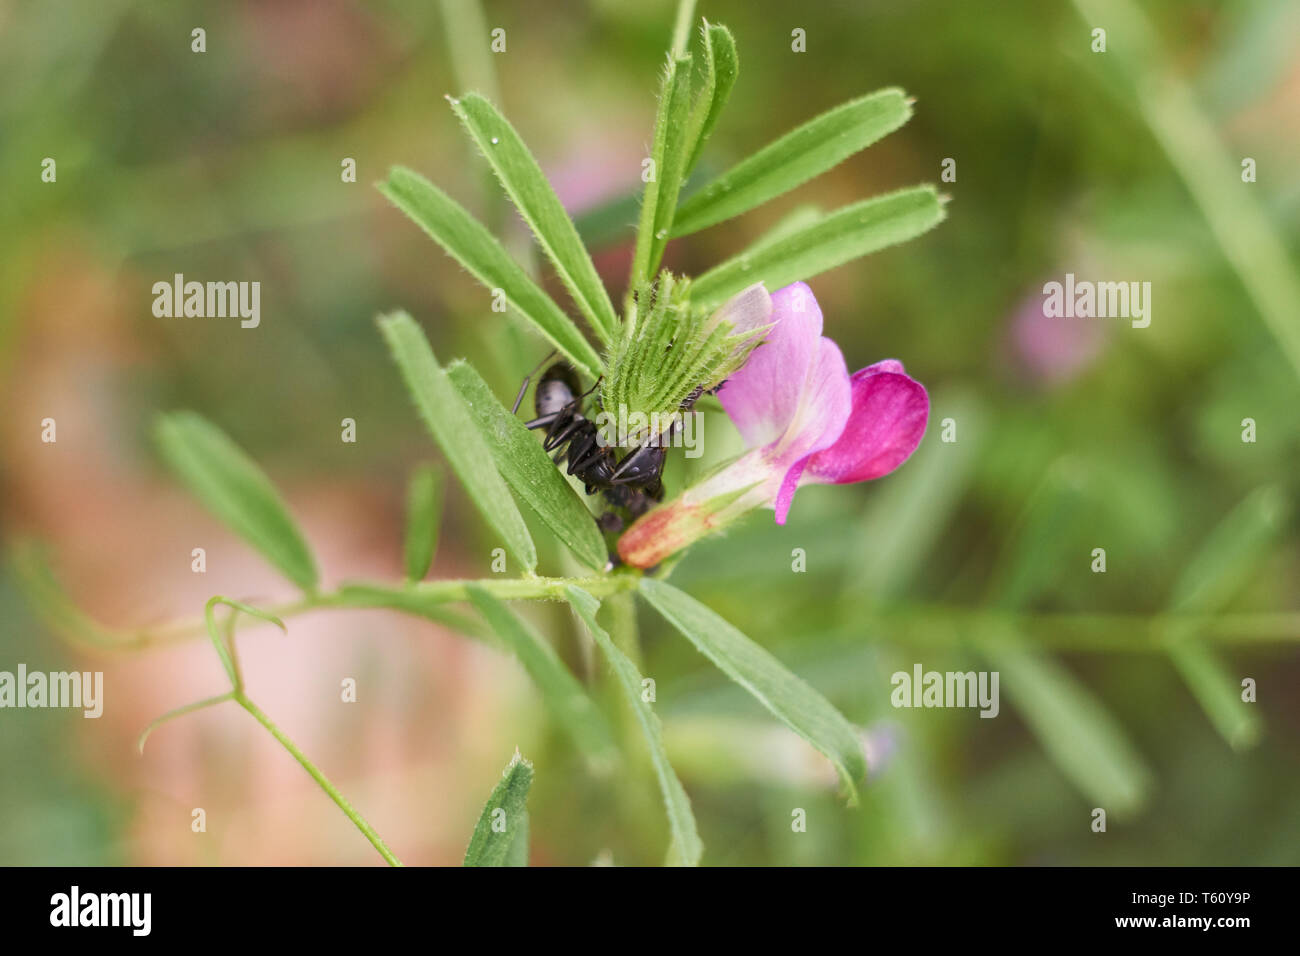 A close up shot of Japanese vetch (Vicia angustifolia) flower growing in a park with large black ant harvesting honeydew from black aphids. Stock Photo